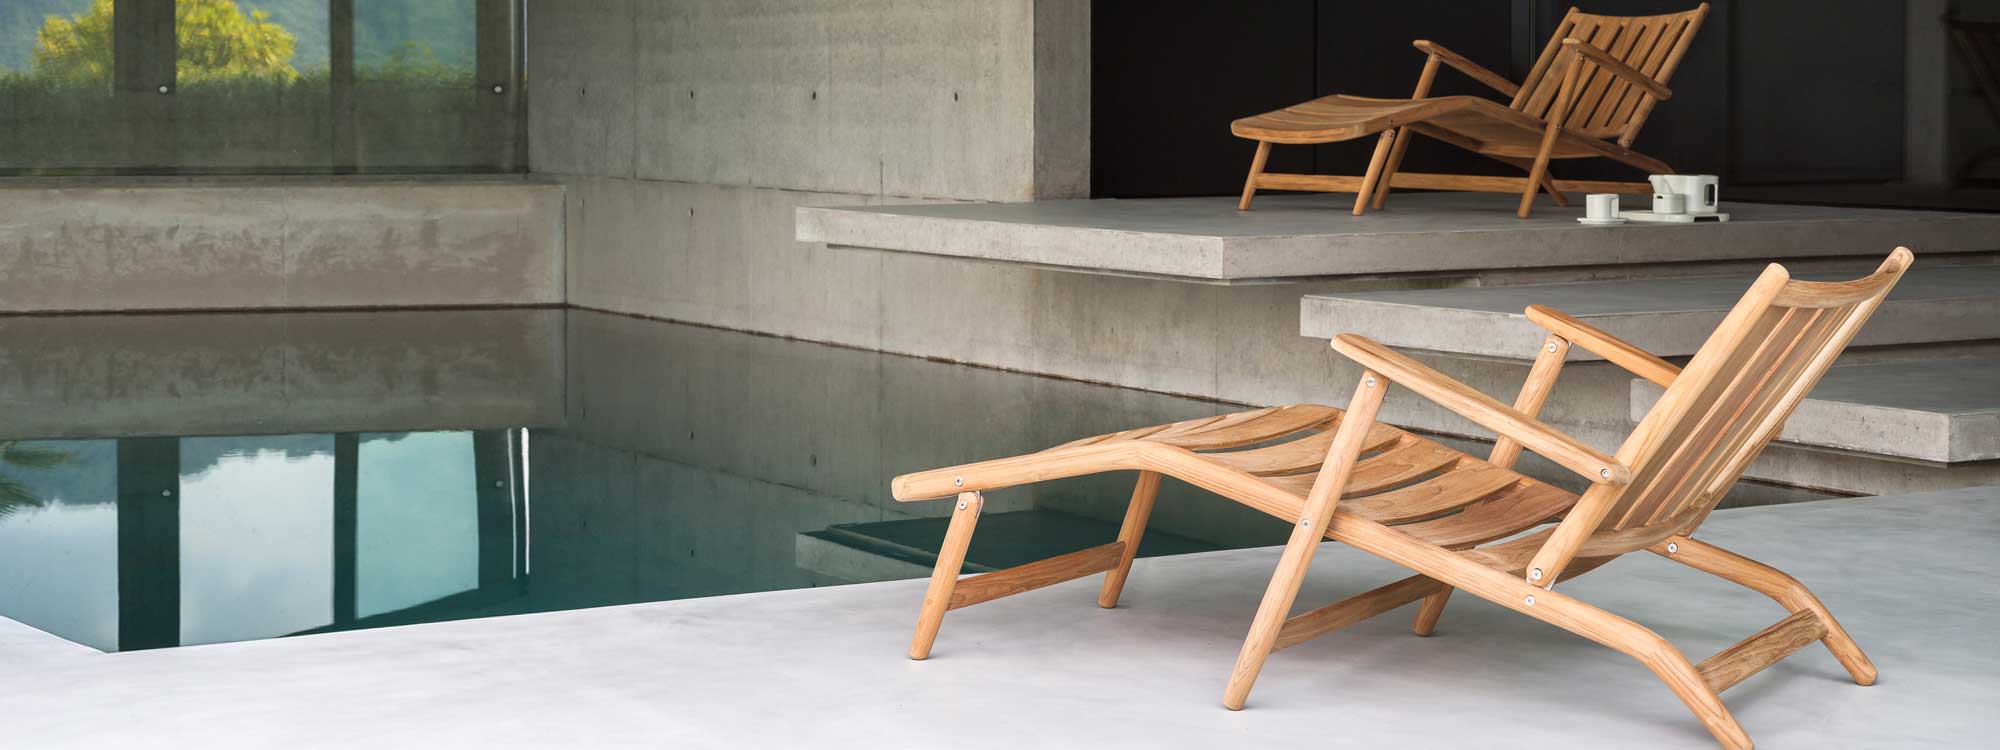 Levante modern steamer chairs around polished concrete poolside